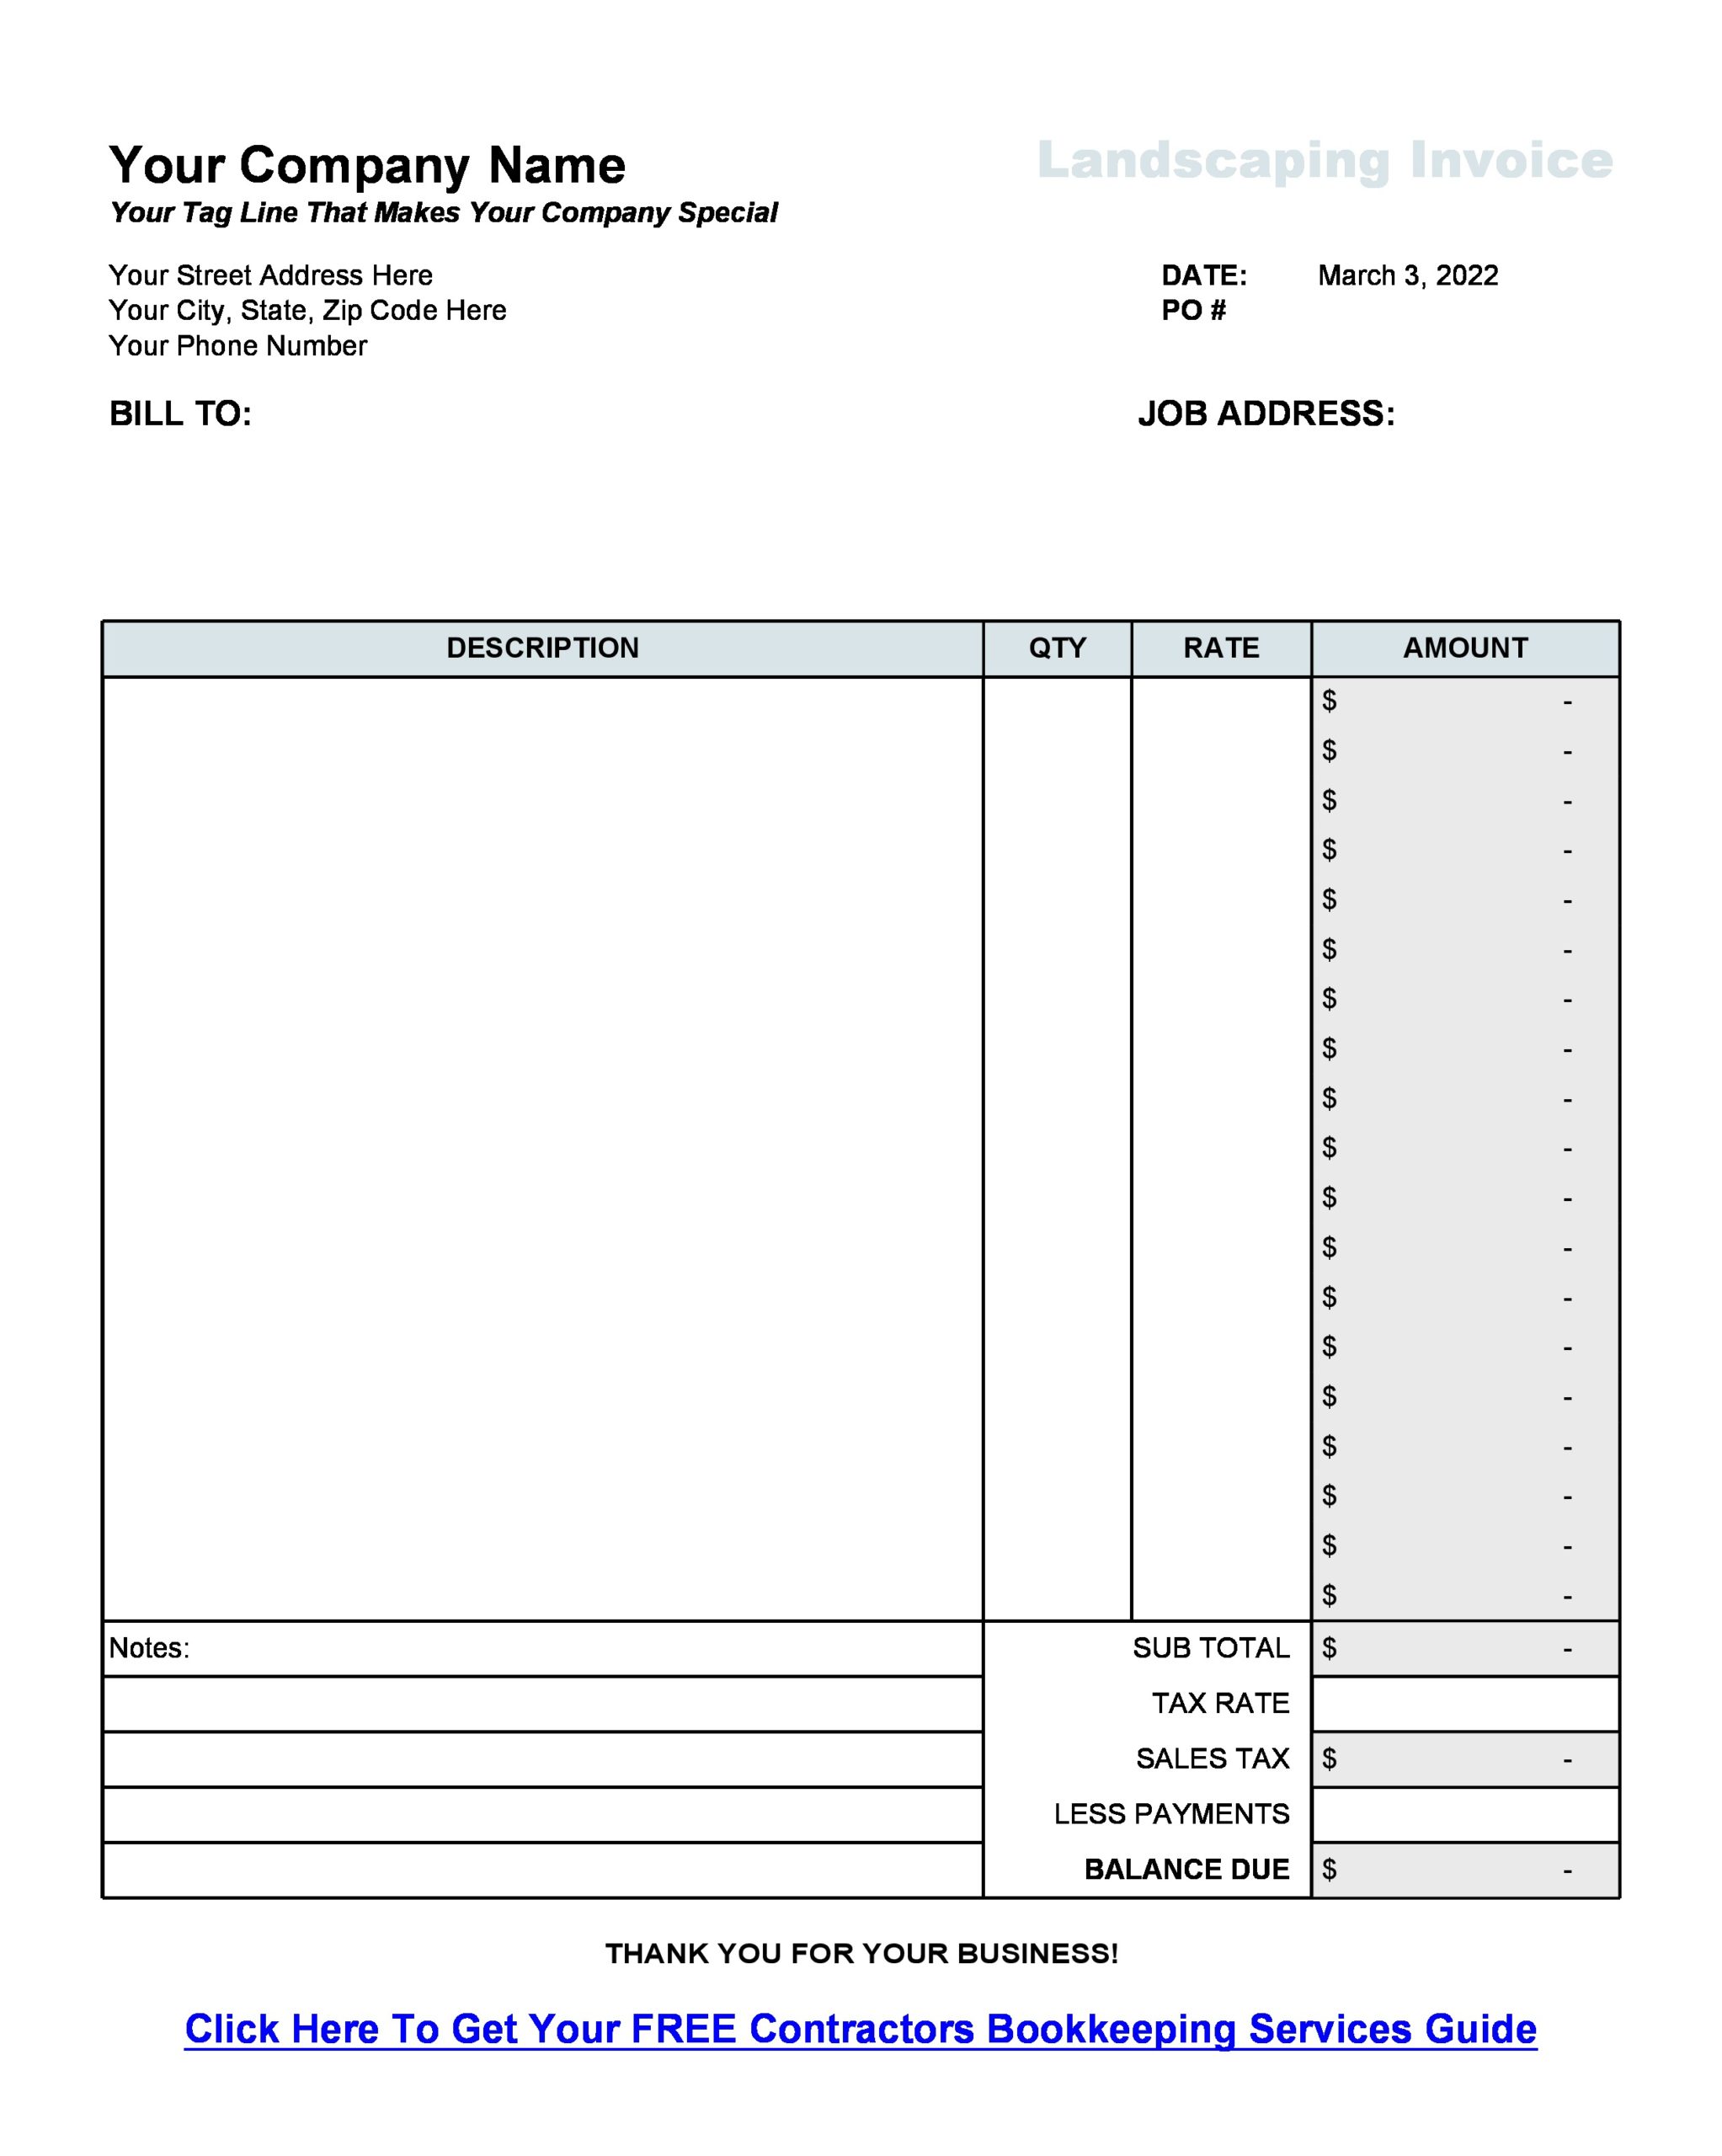 Free landscaping invoice 35